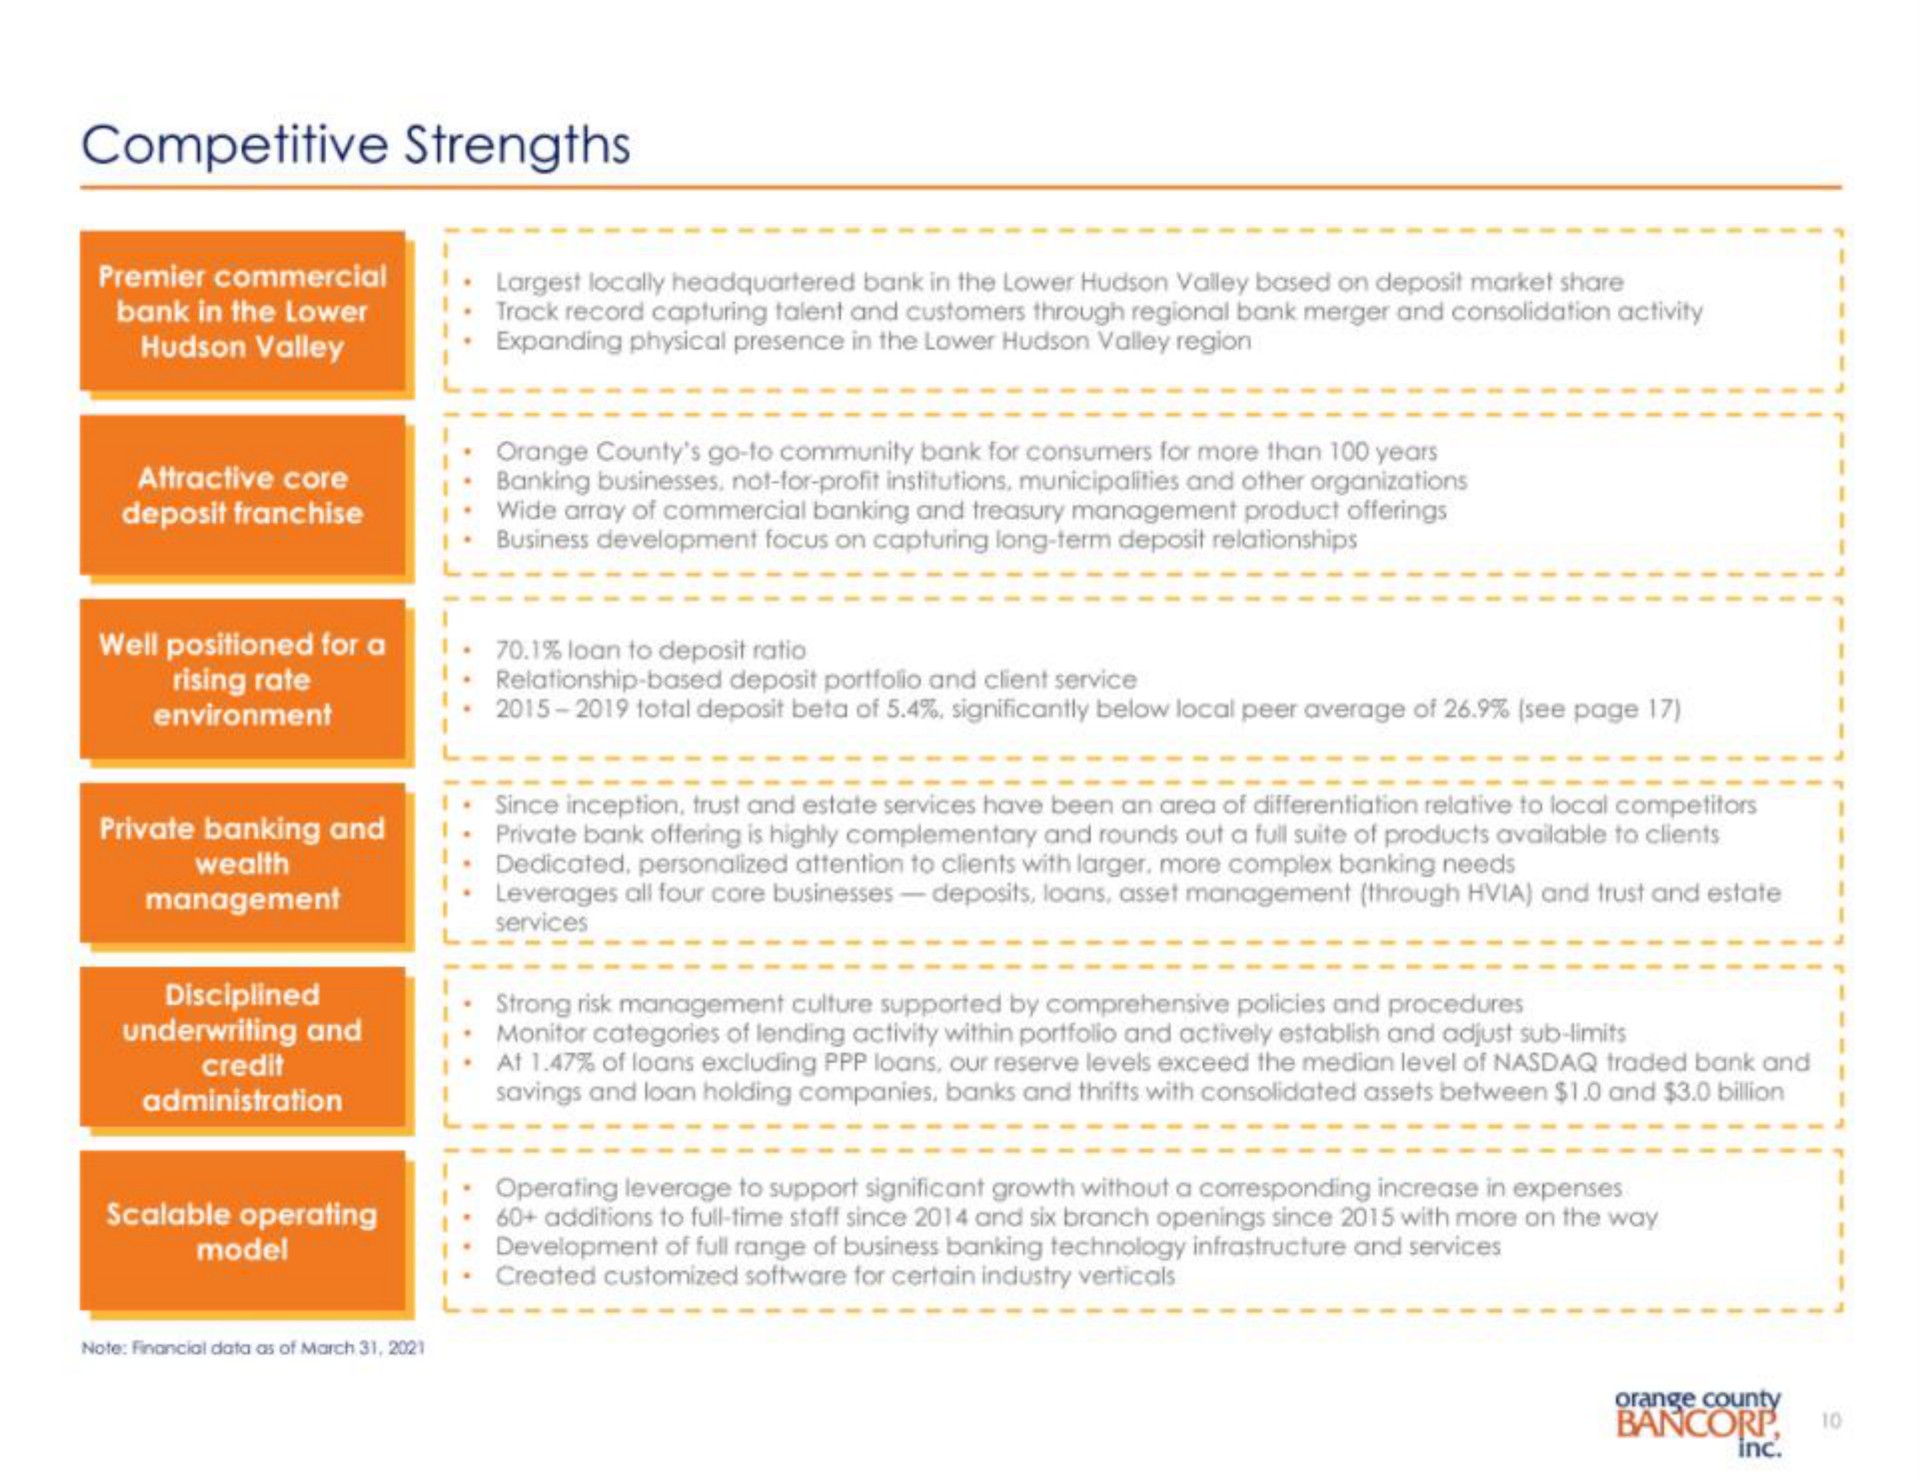 competitive strengths | Orange County Bancorp